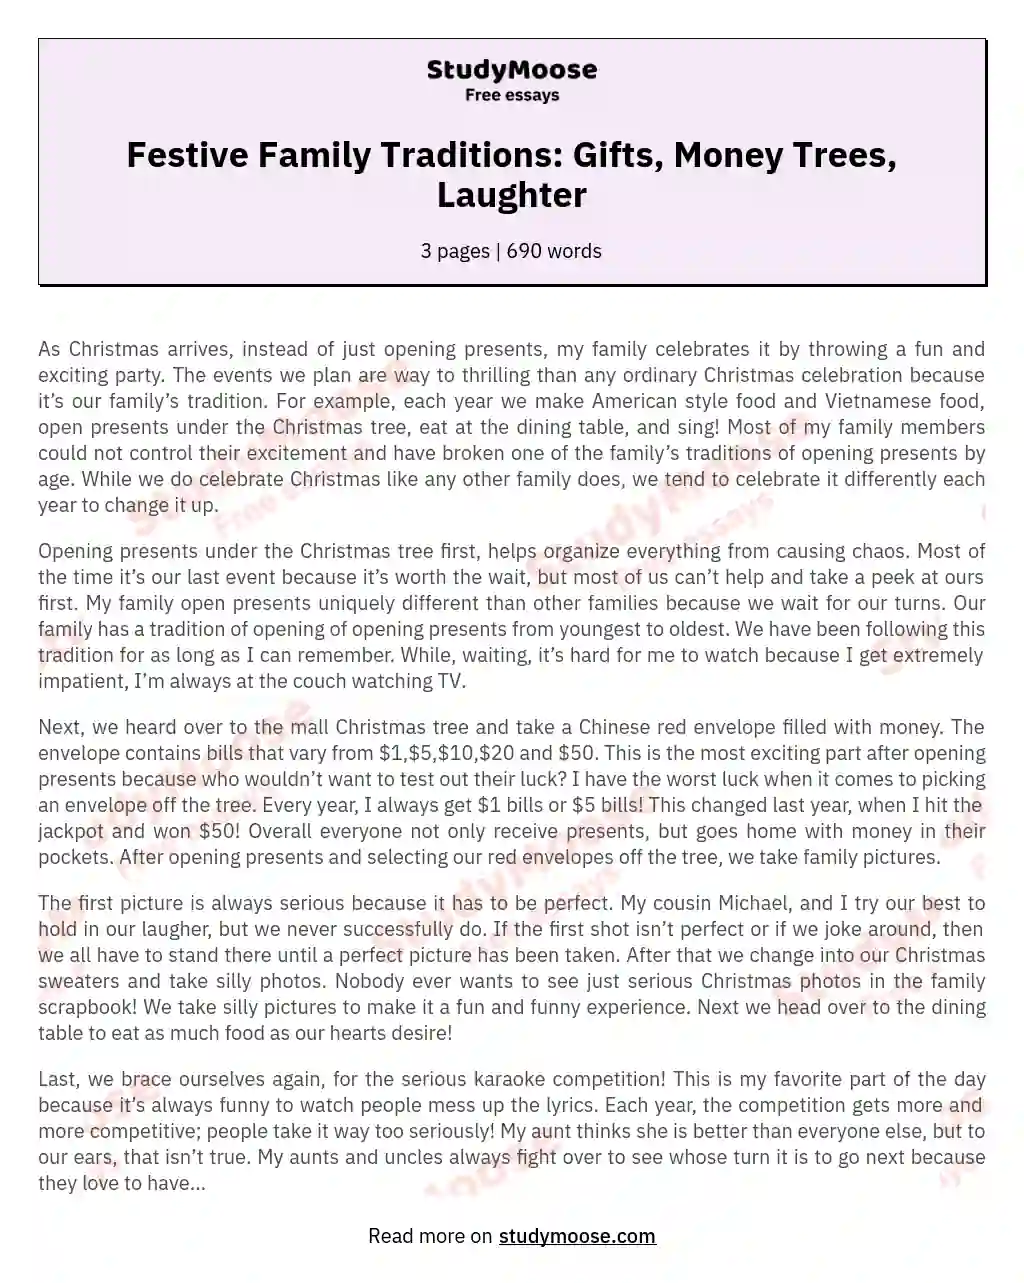 Festive Family Traditions: Gifts, Money Trees, Laughter essay